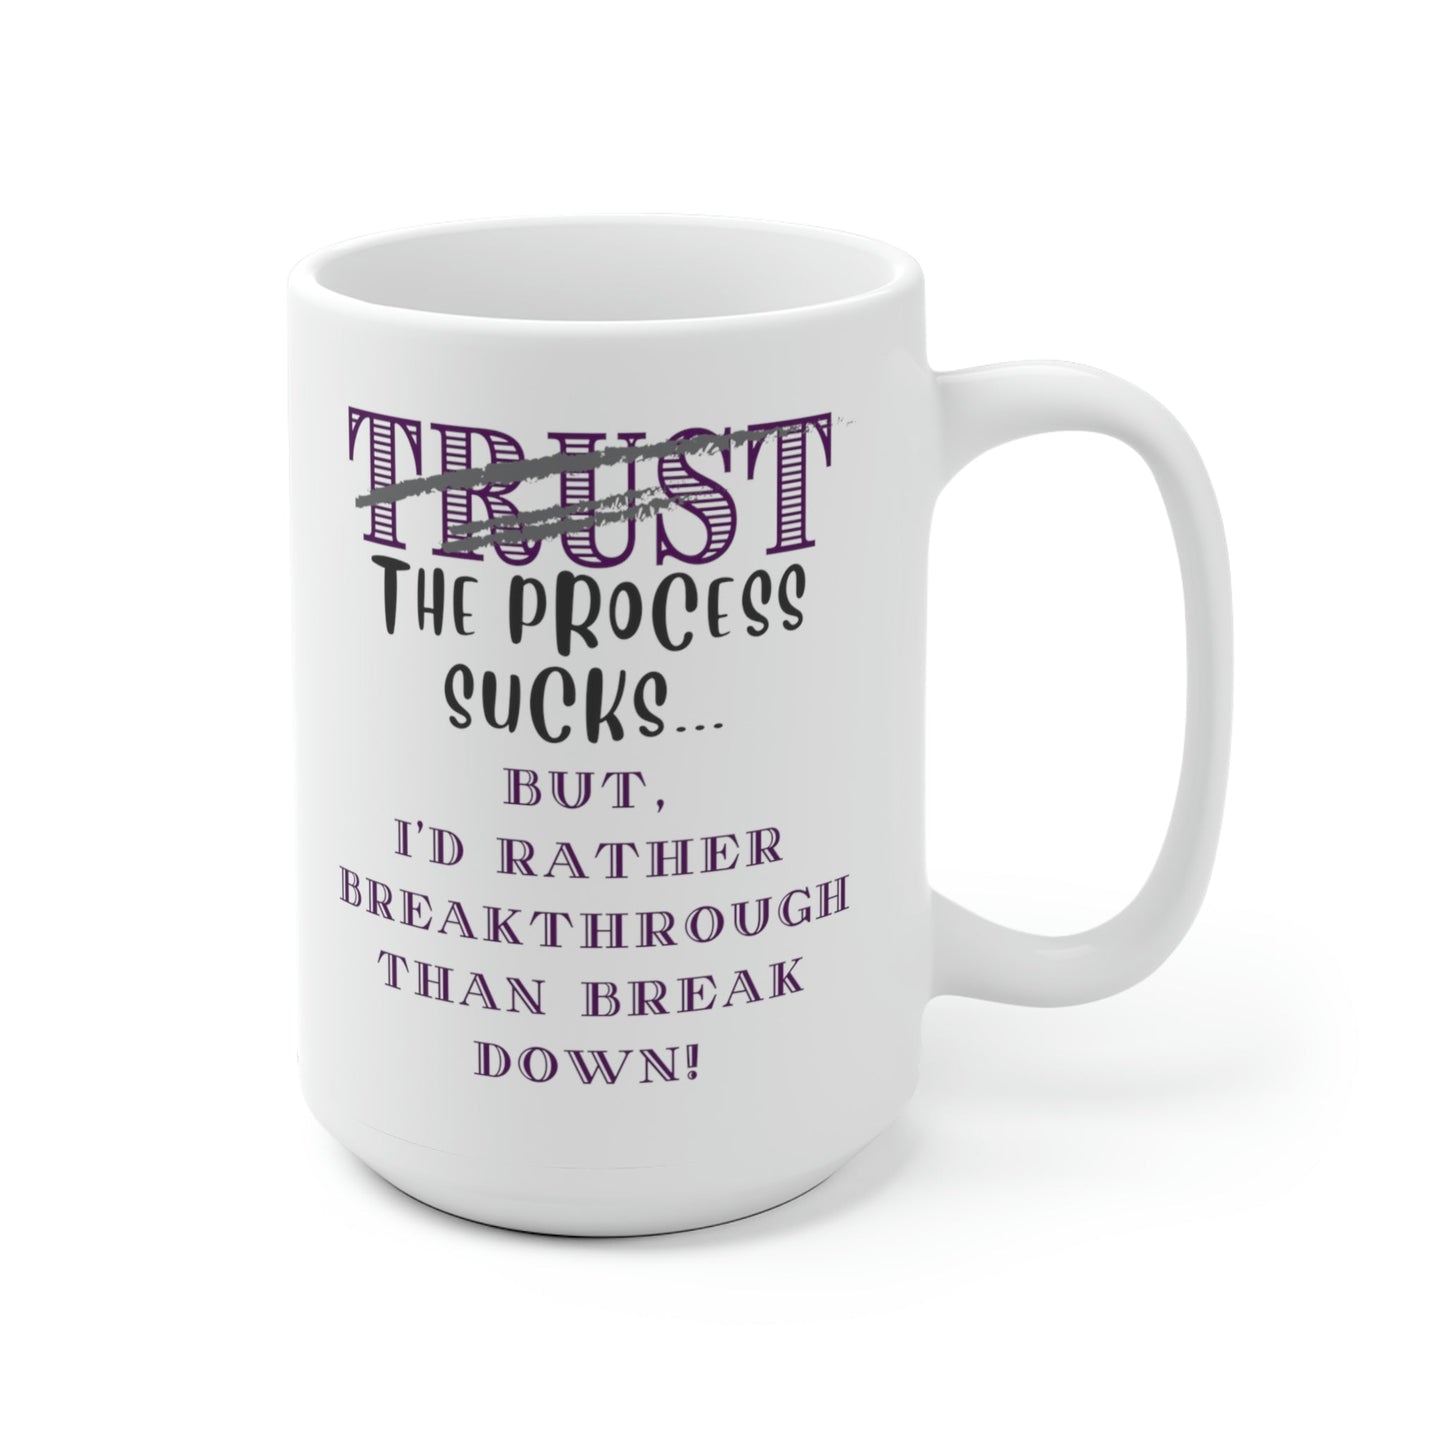 White Ceramic Mug, Accent Mug, Sassy and Funny, Inspirational, Assorted Colors, Two Available Sizes